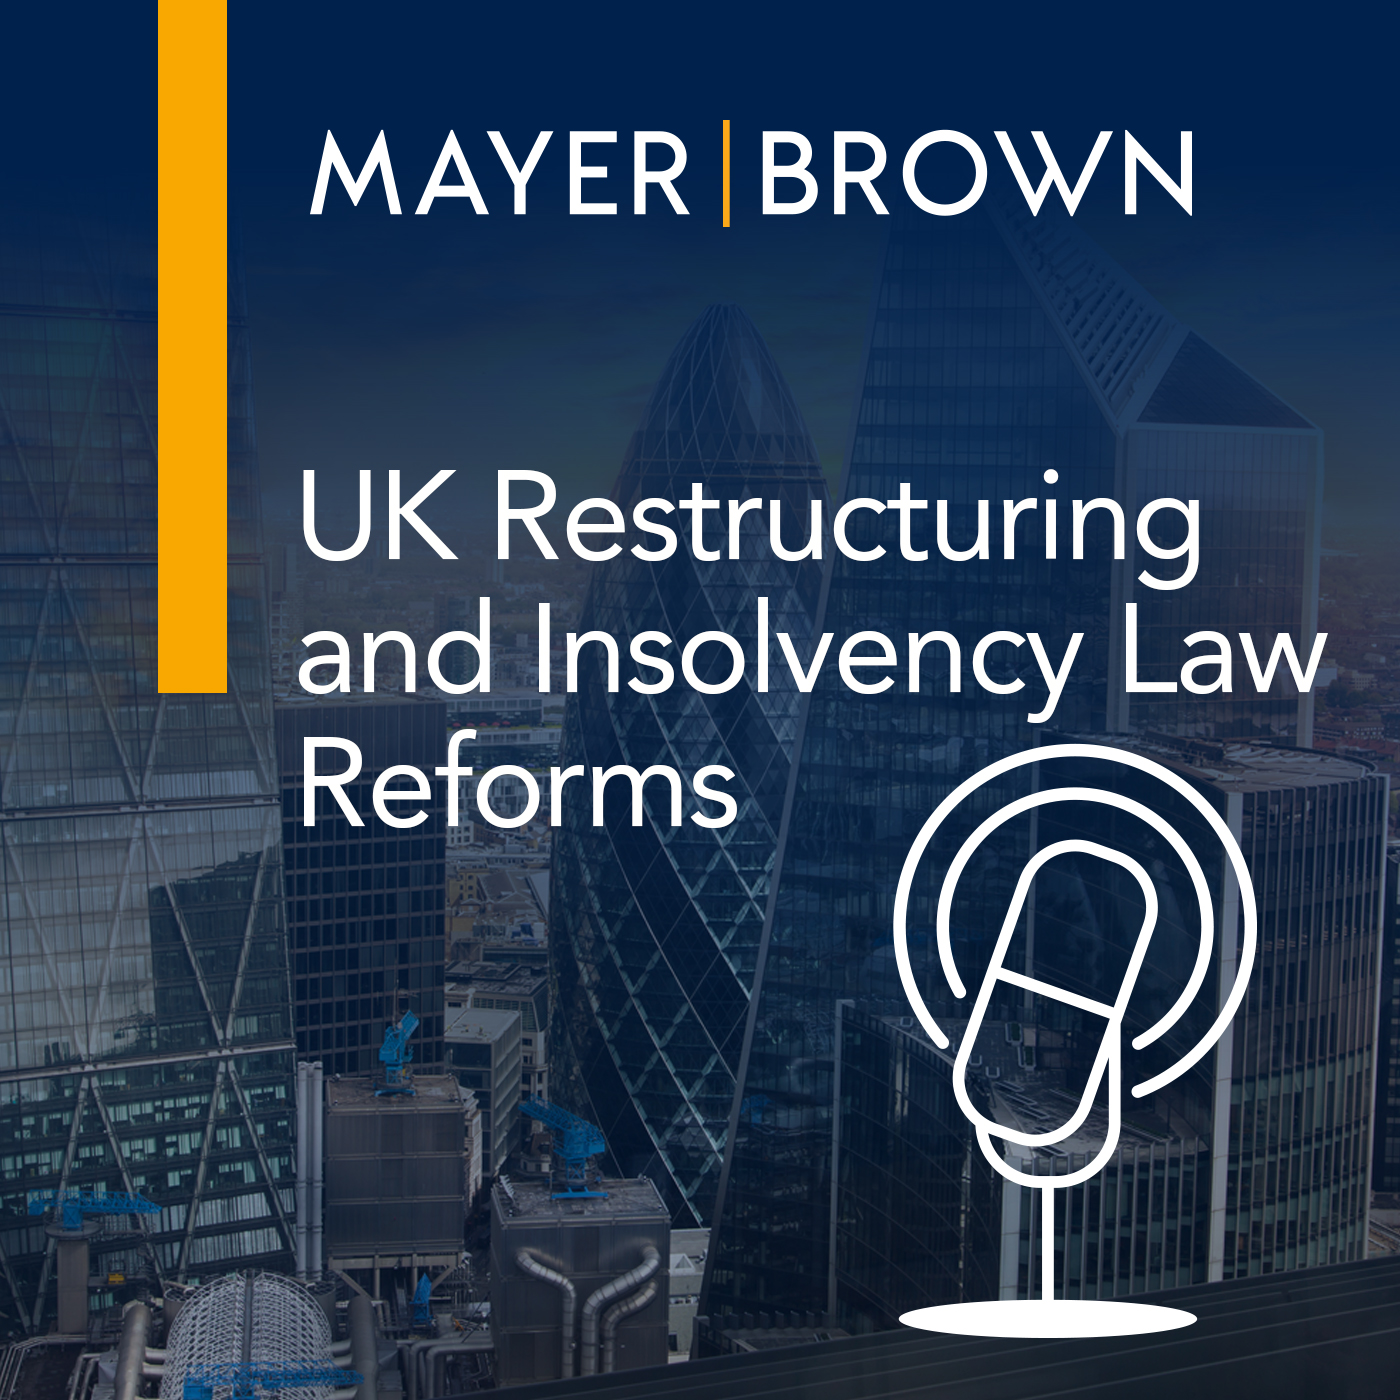 UK Restructuring and Insolvency Law Reforms Podcast Mini-Series